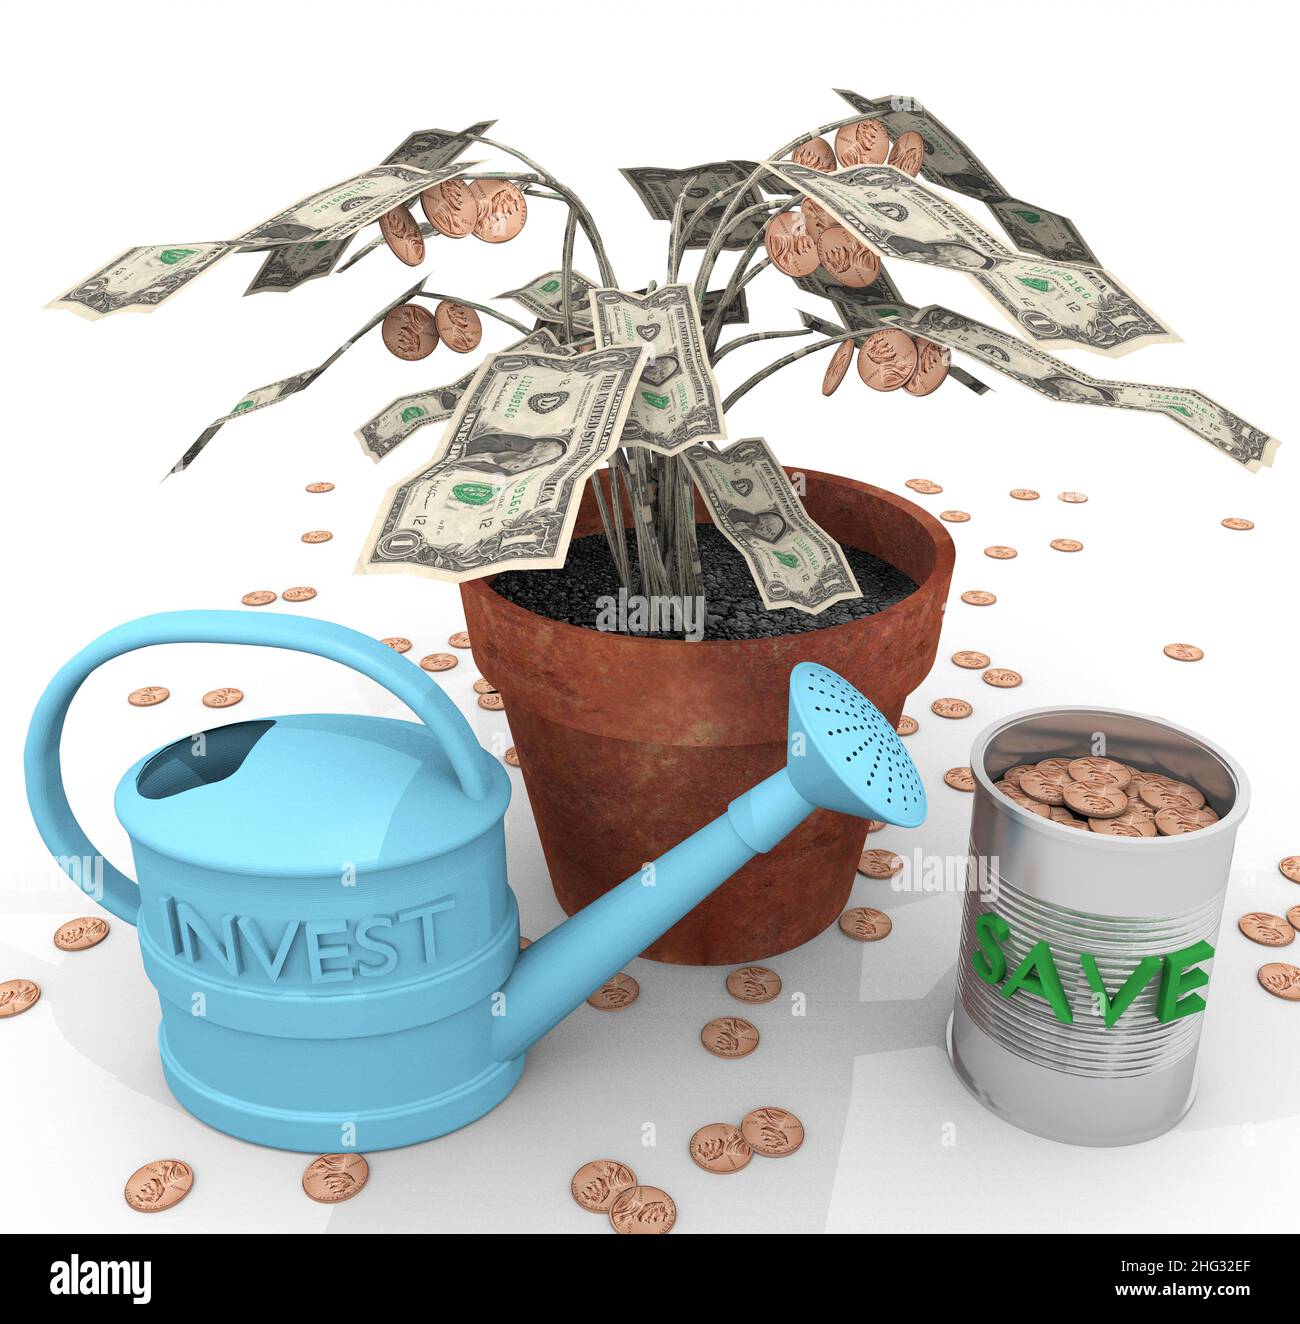 How To Grow Wealth An illustration related to growing wealth with the depiction of a colloquial potted 'money tree'. Stock Photo